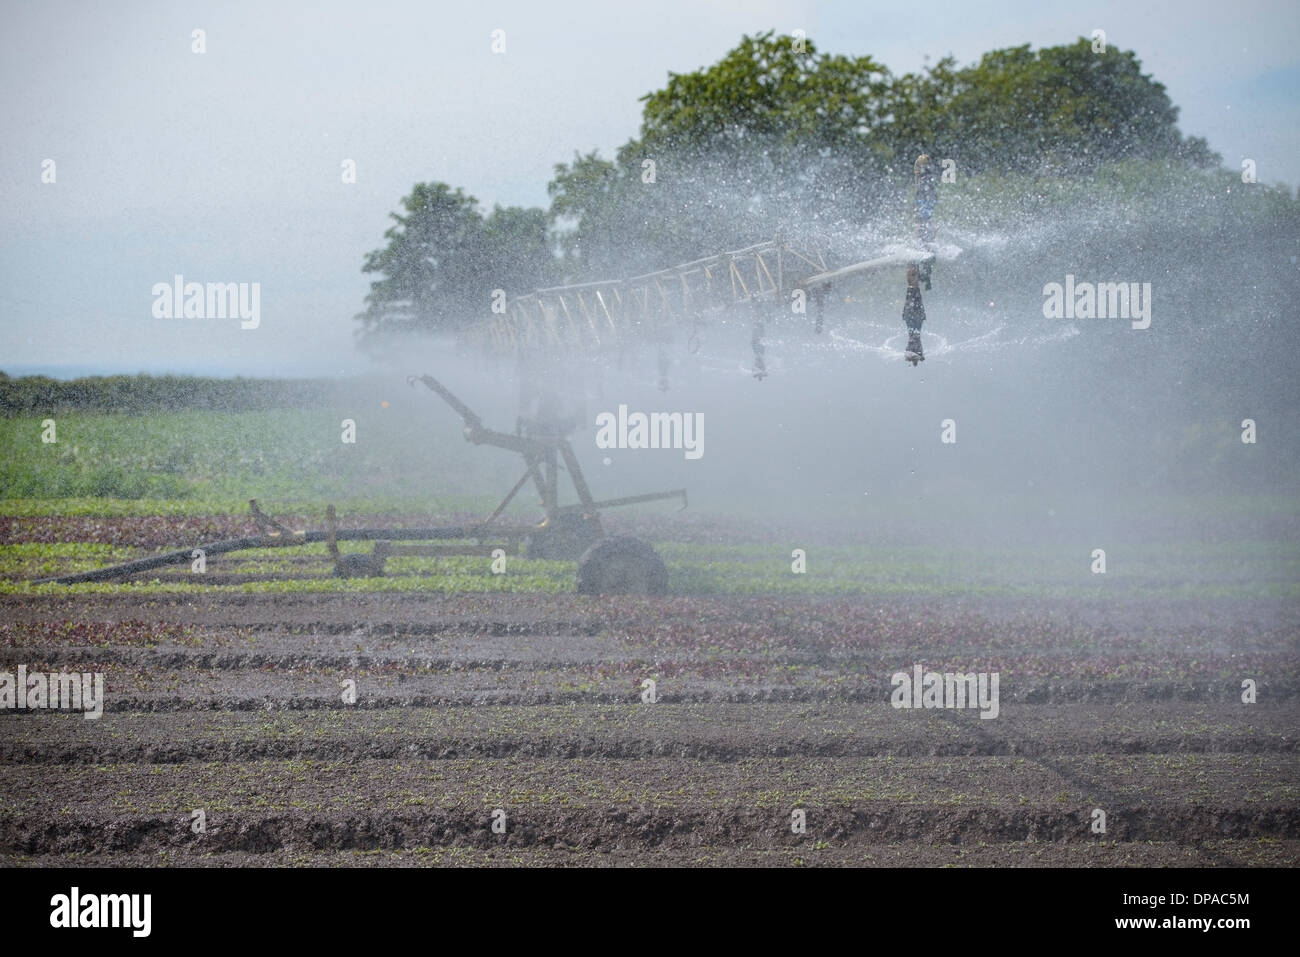 Watering system spraying crops Stock Photo